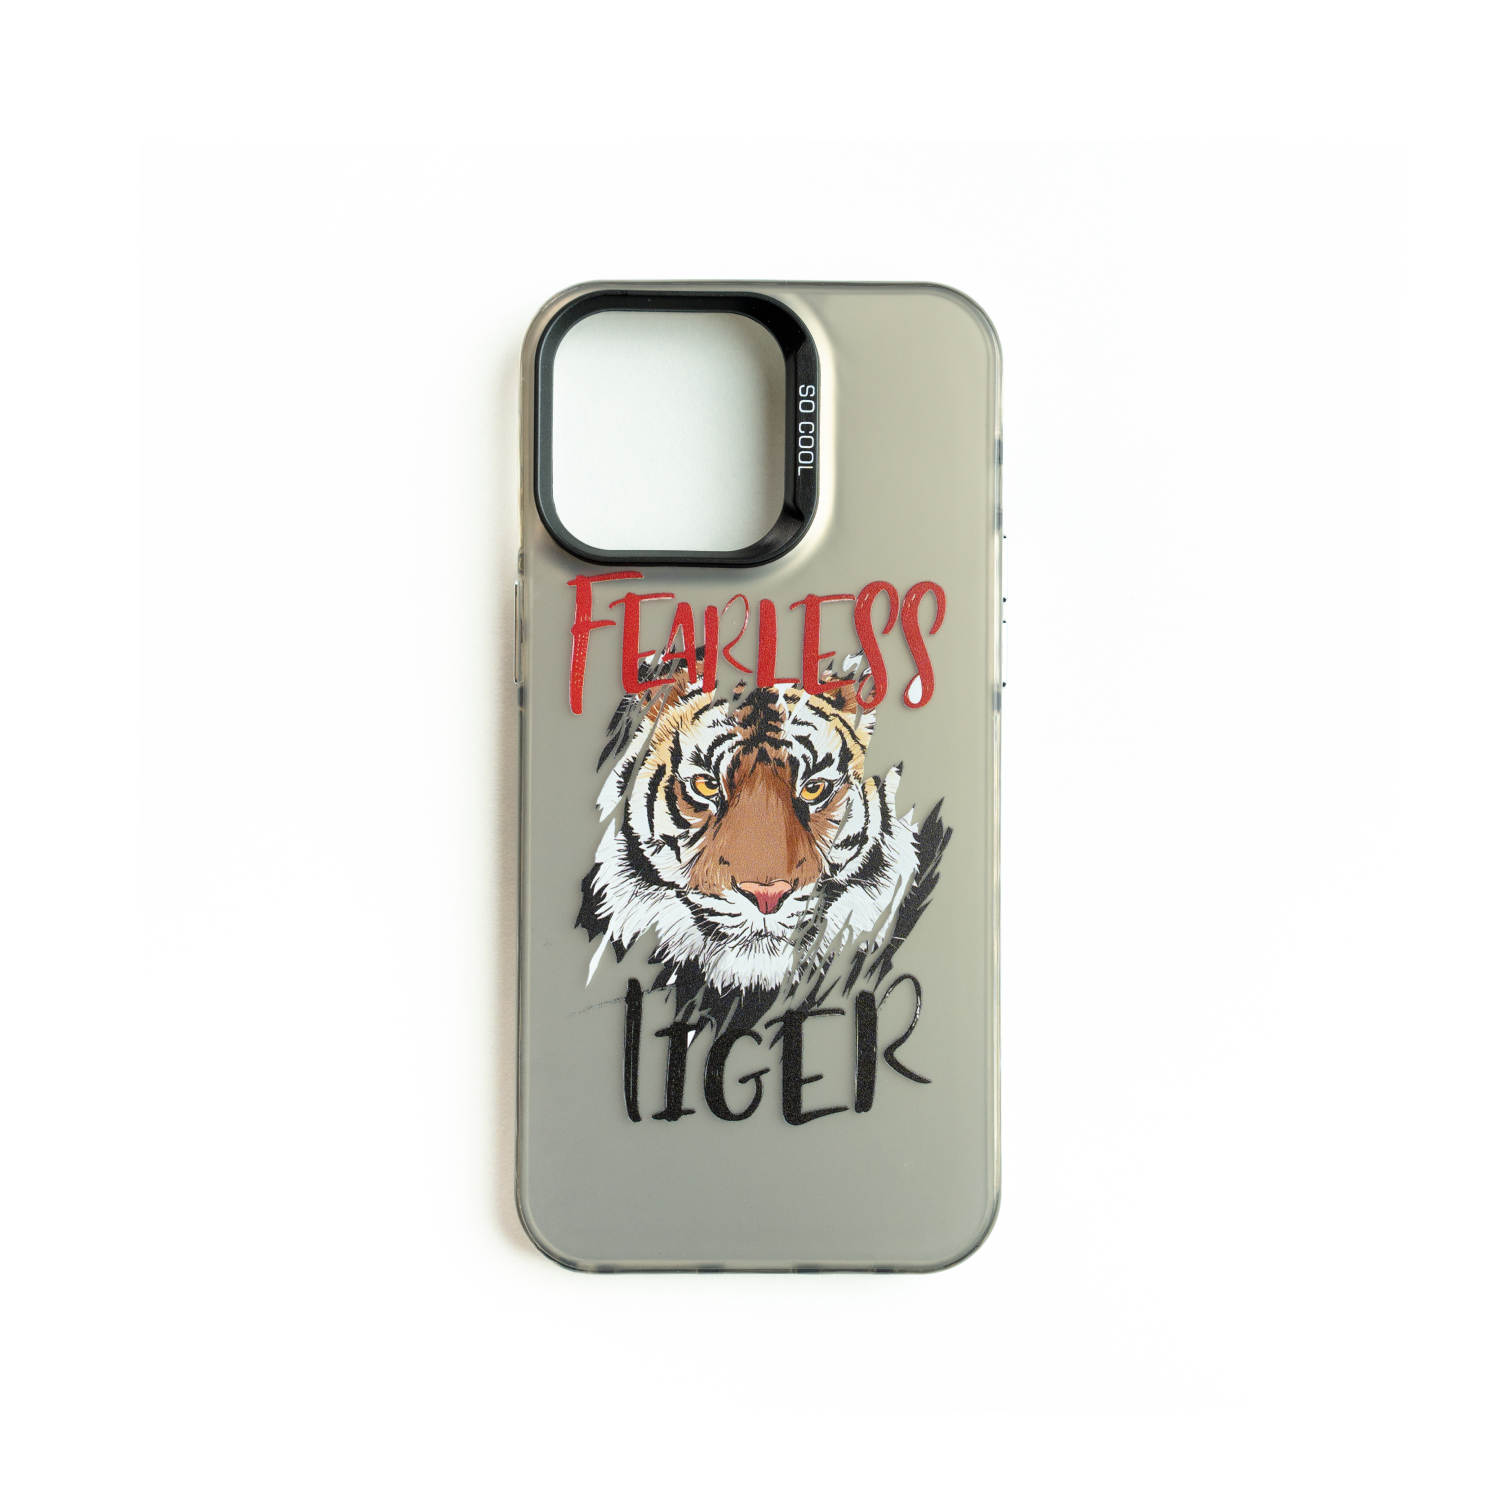 Fearless Tiger - Iphone Case - Cult Collection